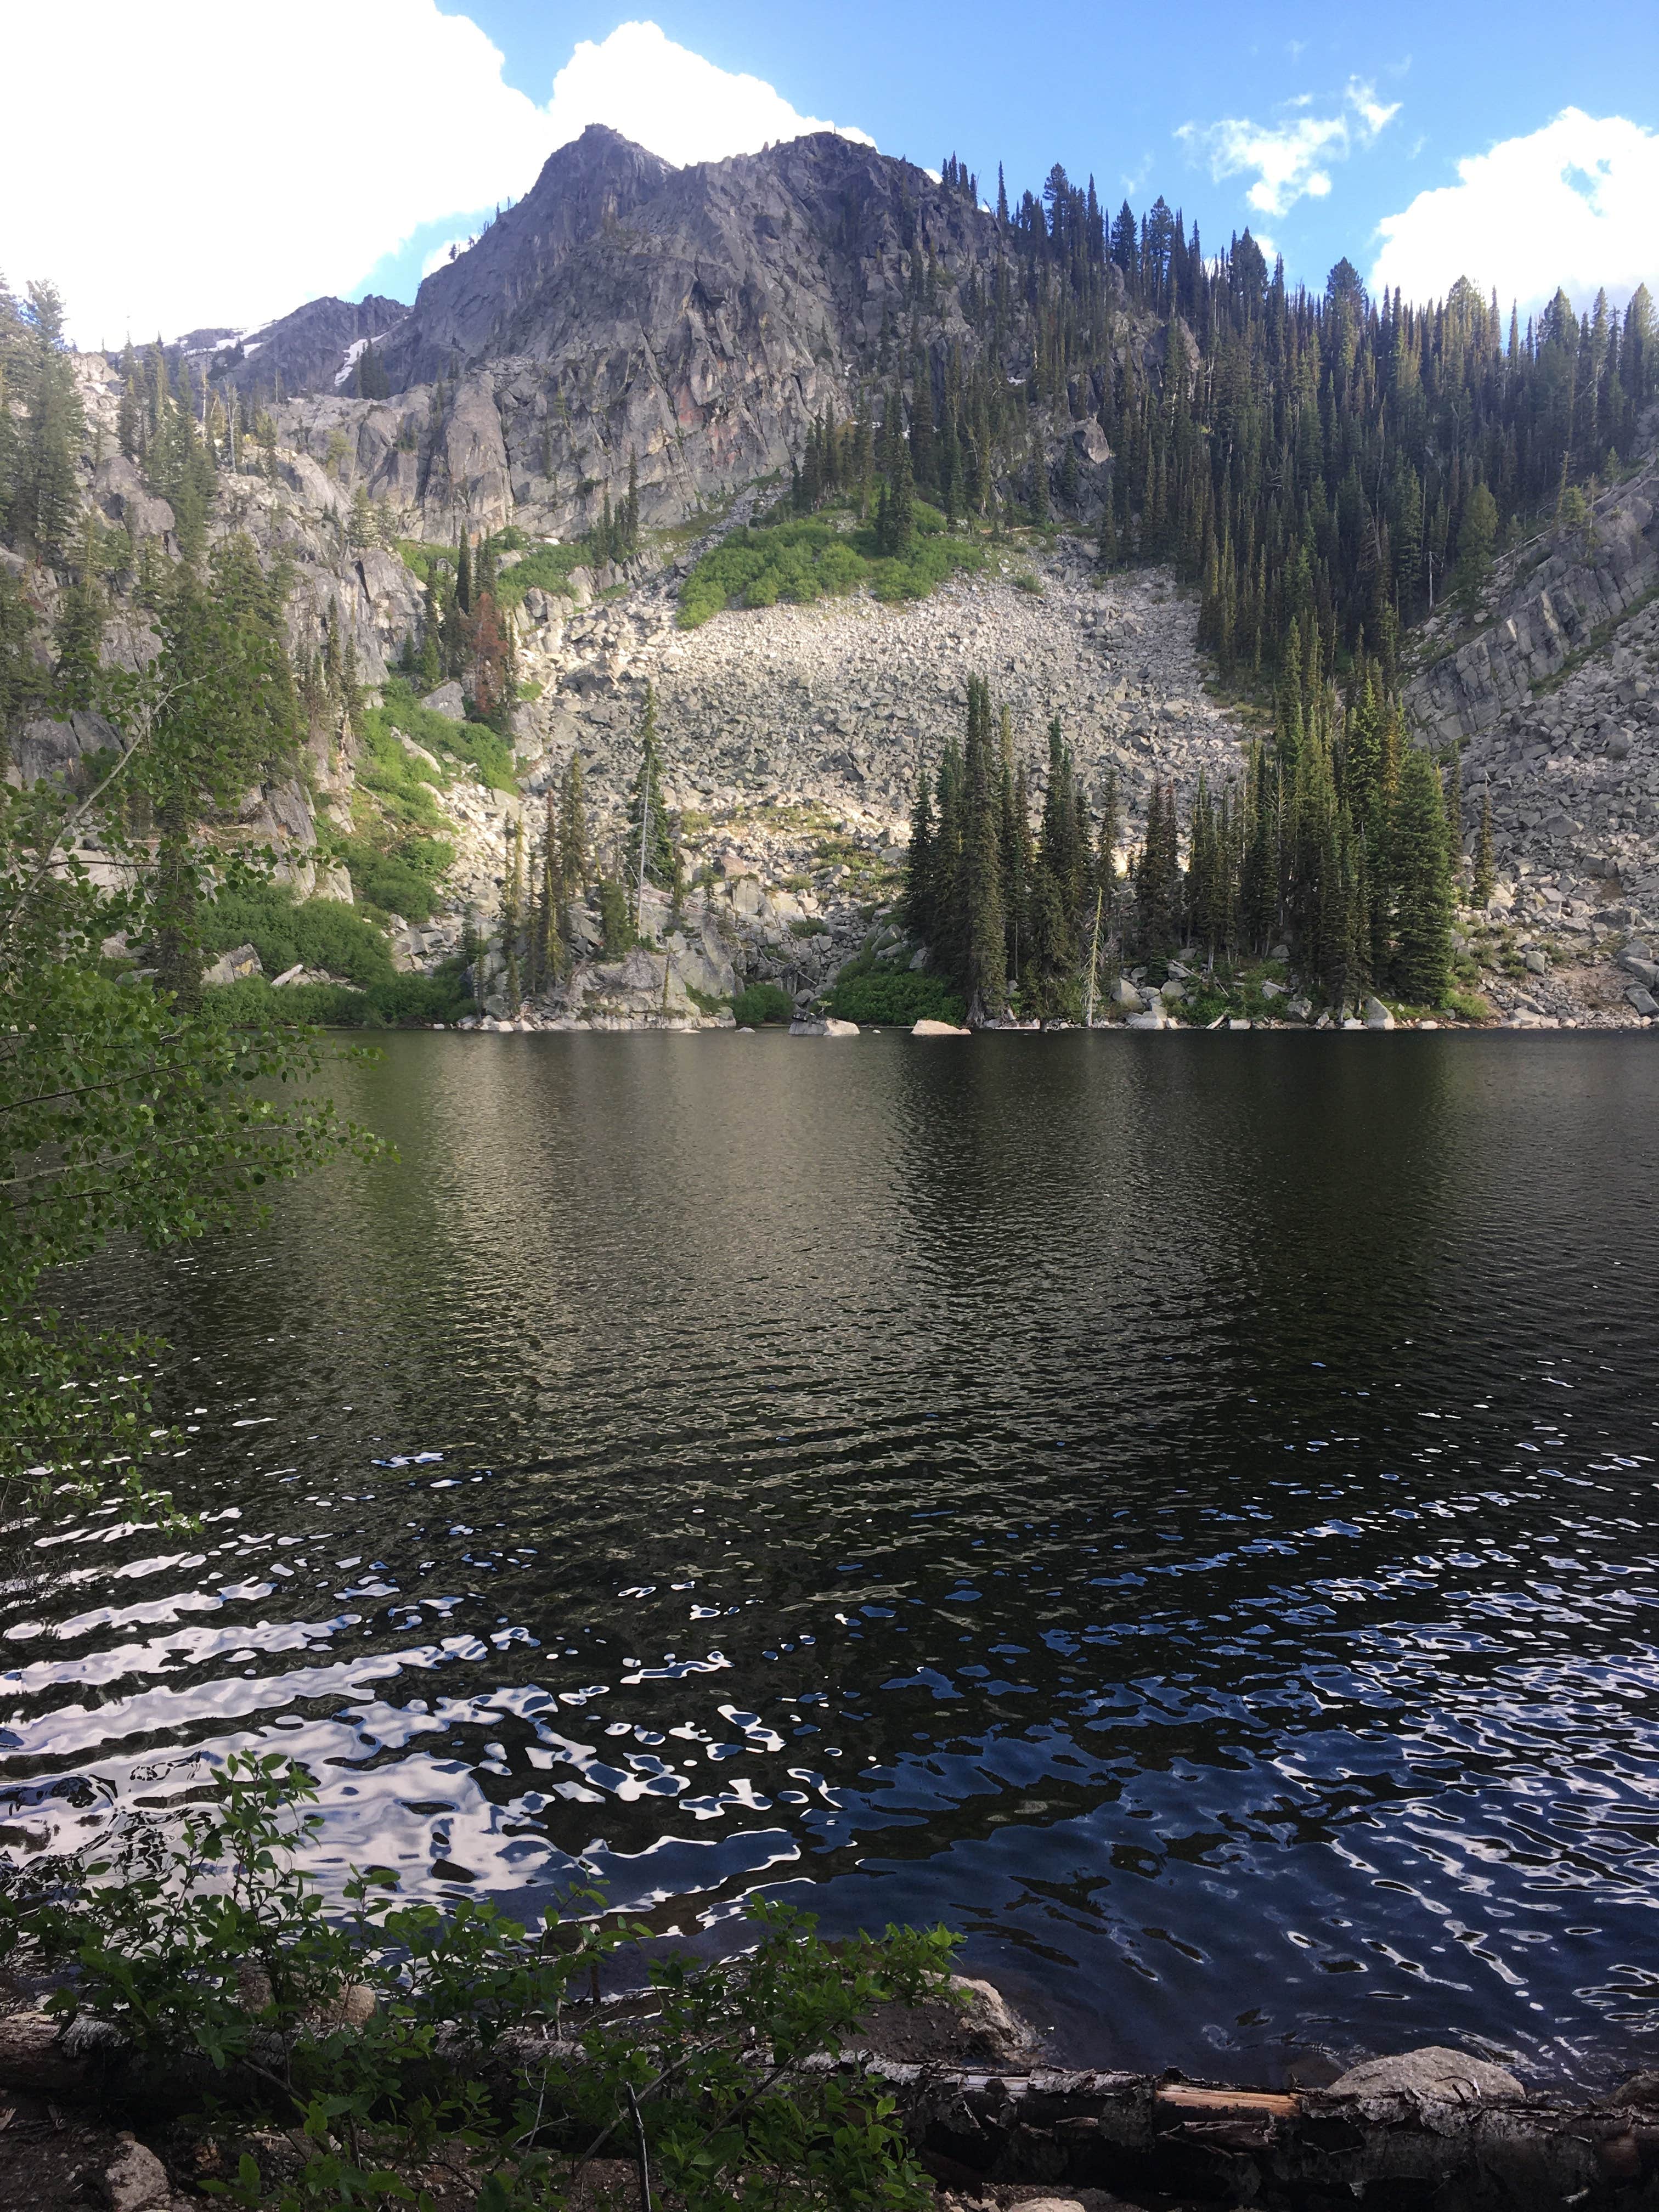 Camper submitted image from Lake Louie Dispersed Backcountry Camping - 2